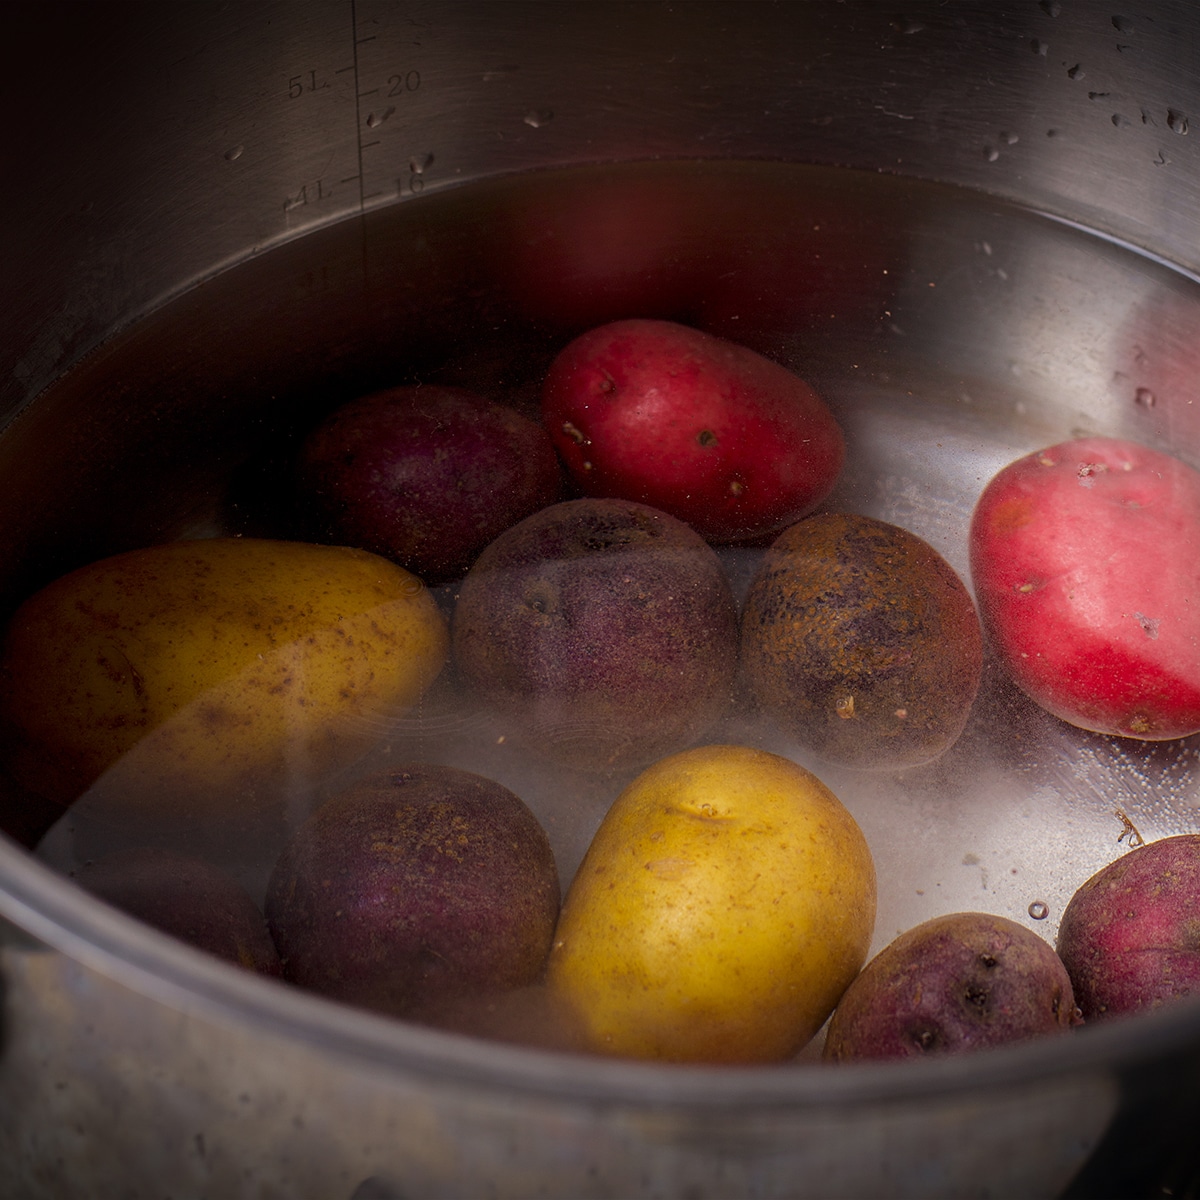 Small potatoes boiling in salt water.